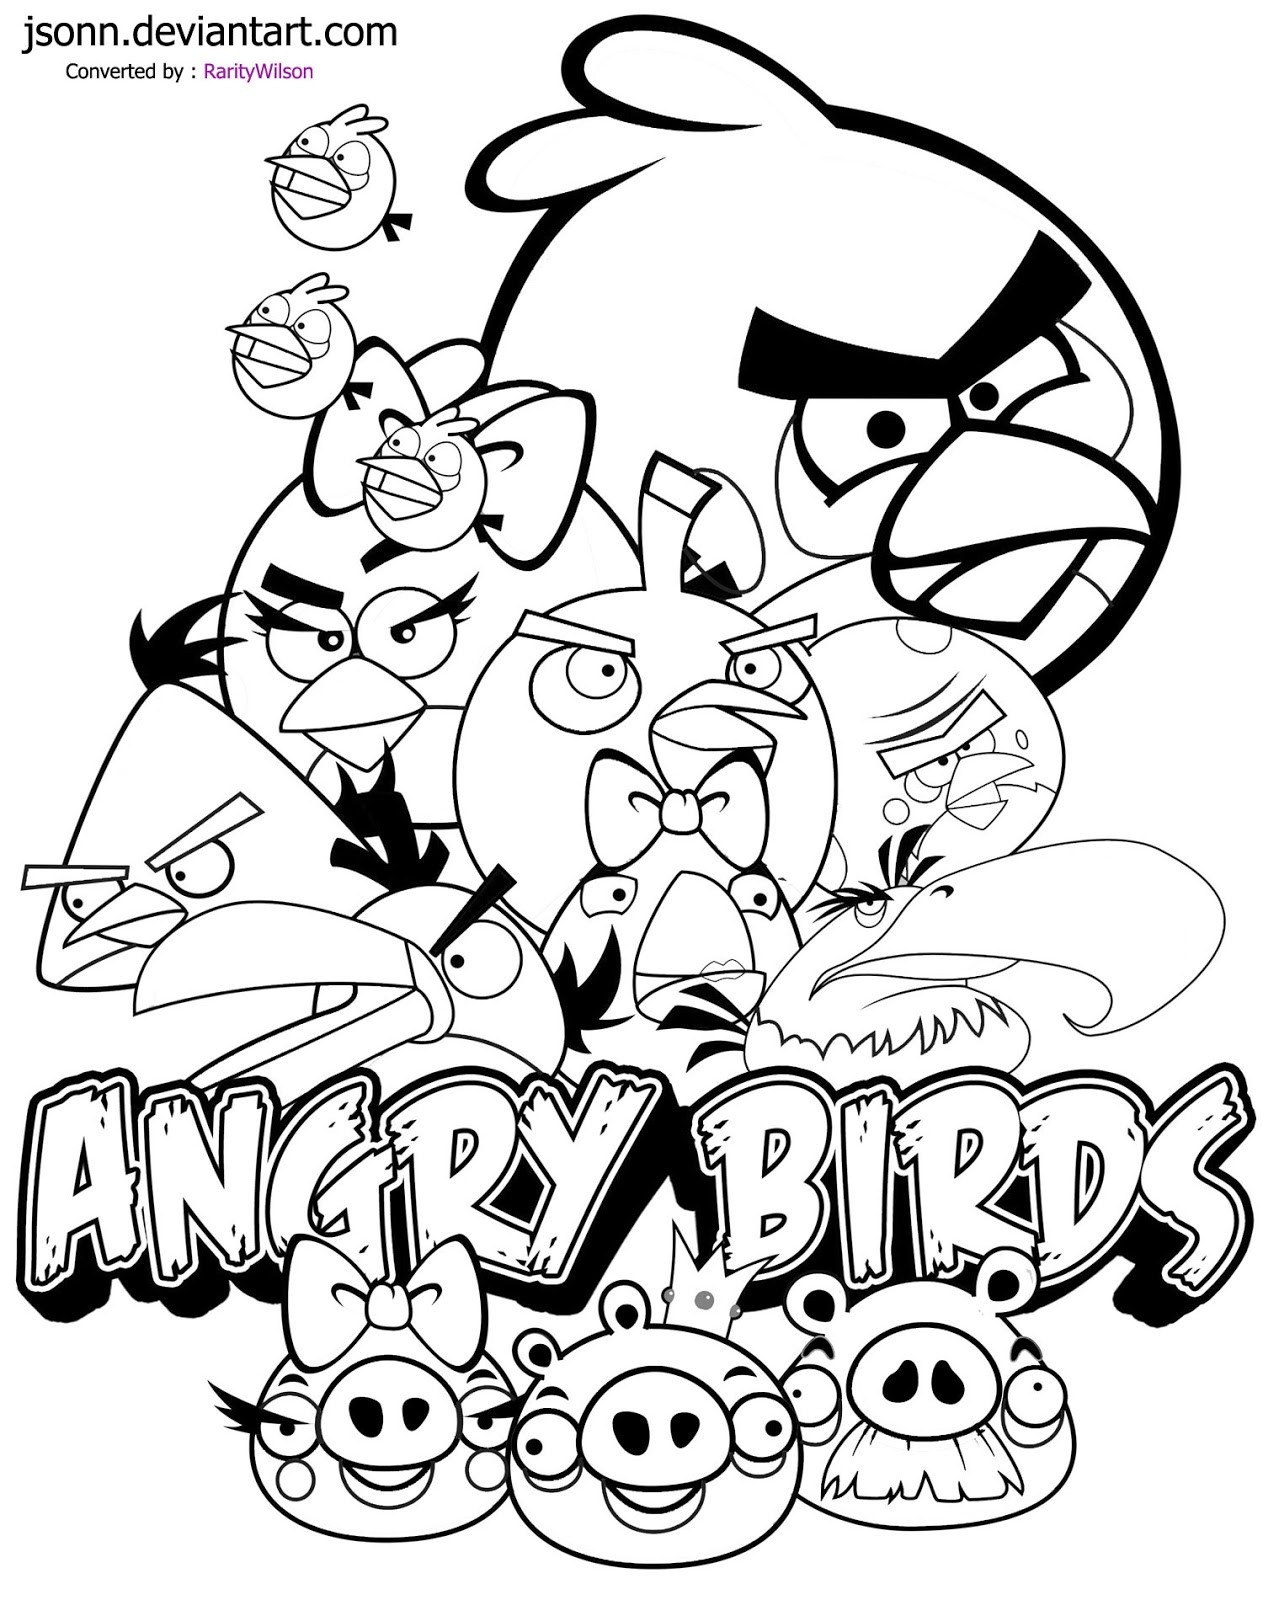 Angry Bird Printable Coloring Pages
 Angry Birds Coloring Pages